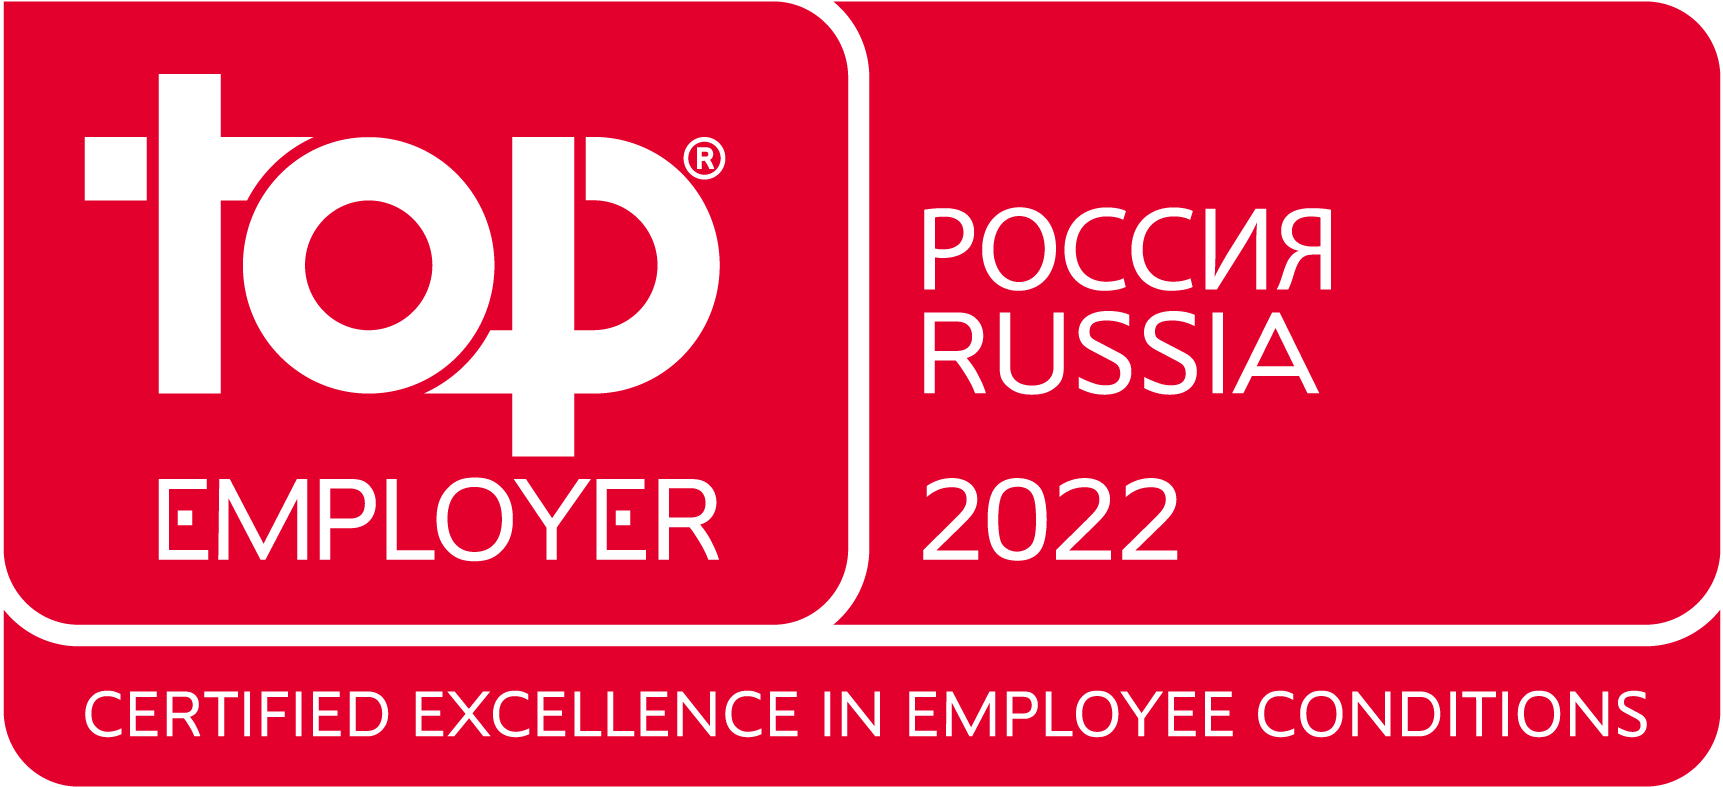 Top Employer Russia 2022